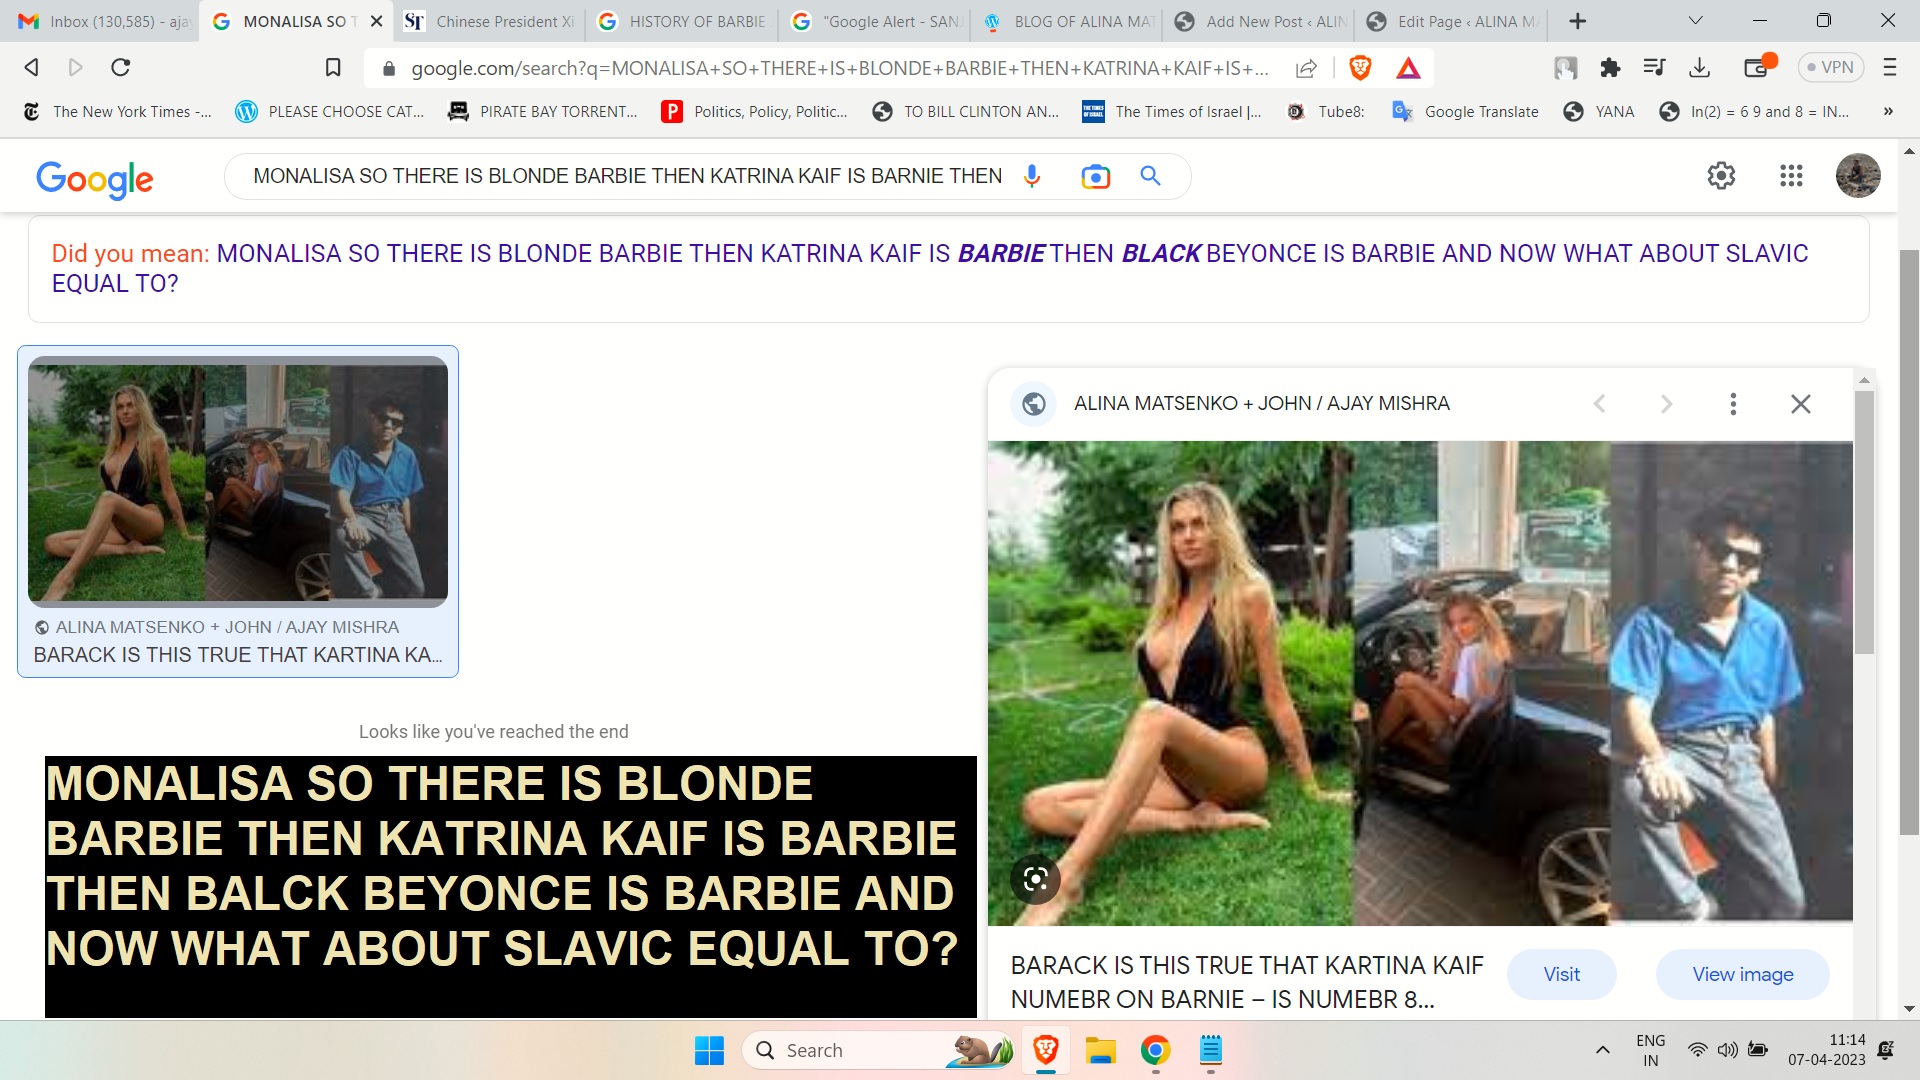 MONALISA SO THERE IS BLONDE BARBIE THEN KATRINA KAIF IS BARBIE THEN BALCK BEYONCE IS BARBIE AND NOW WHAT ABOUT SLAVIC EQUAL TO MISISON VISION STORY ND COMMUNICATION